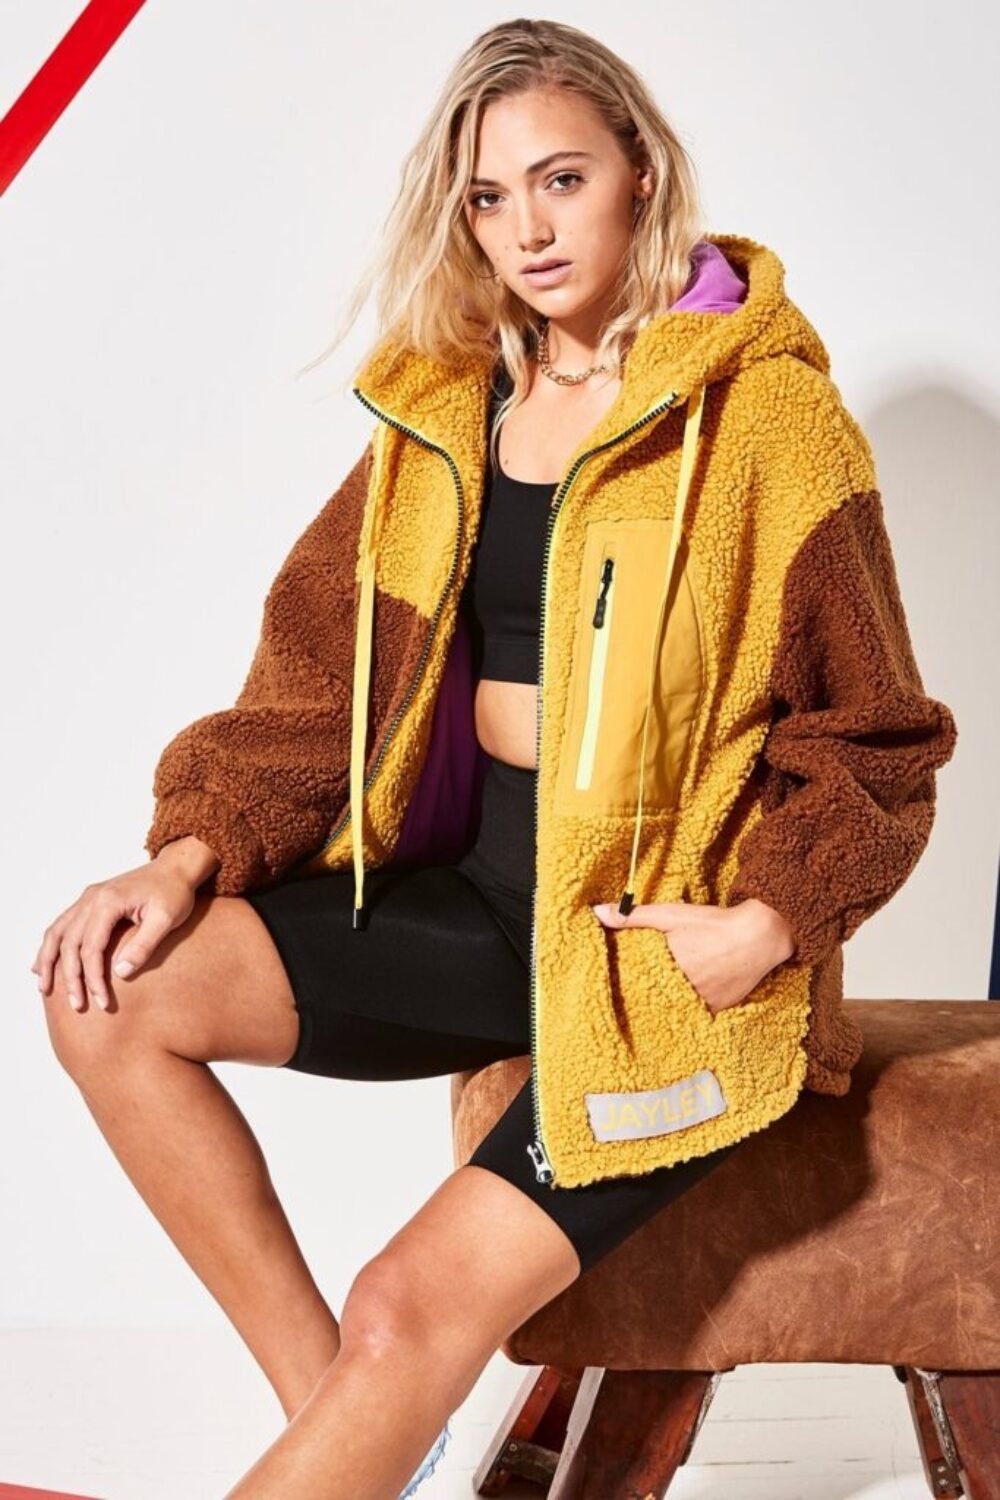 Shop Lux Faux Shearling Hooded Jacket and women's luxury and designer clothes at www.lux-apparel.co.uk